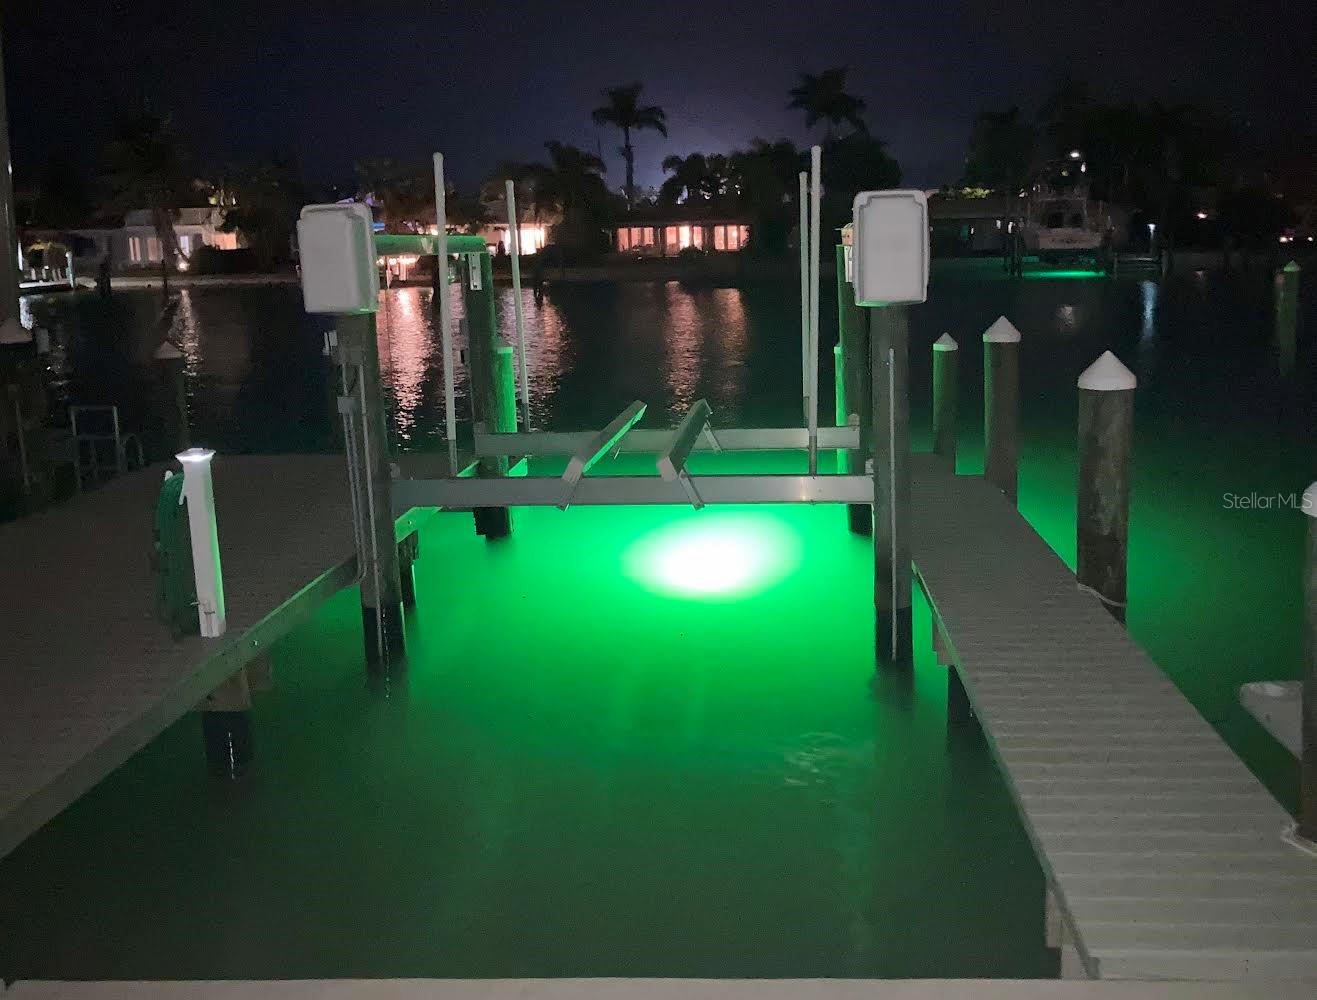 Awesome fishing with the green light under the dock!